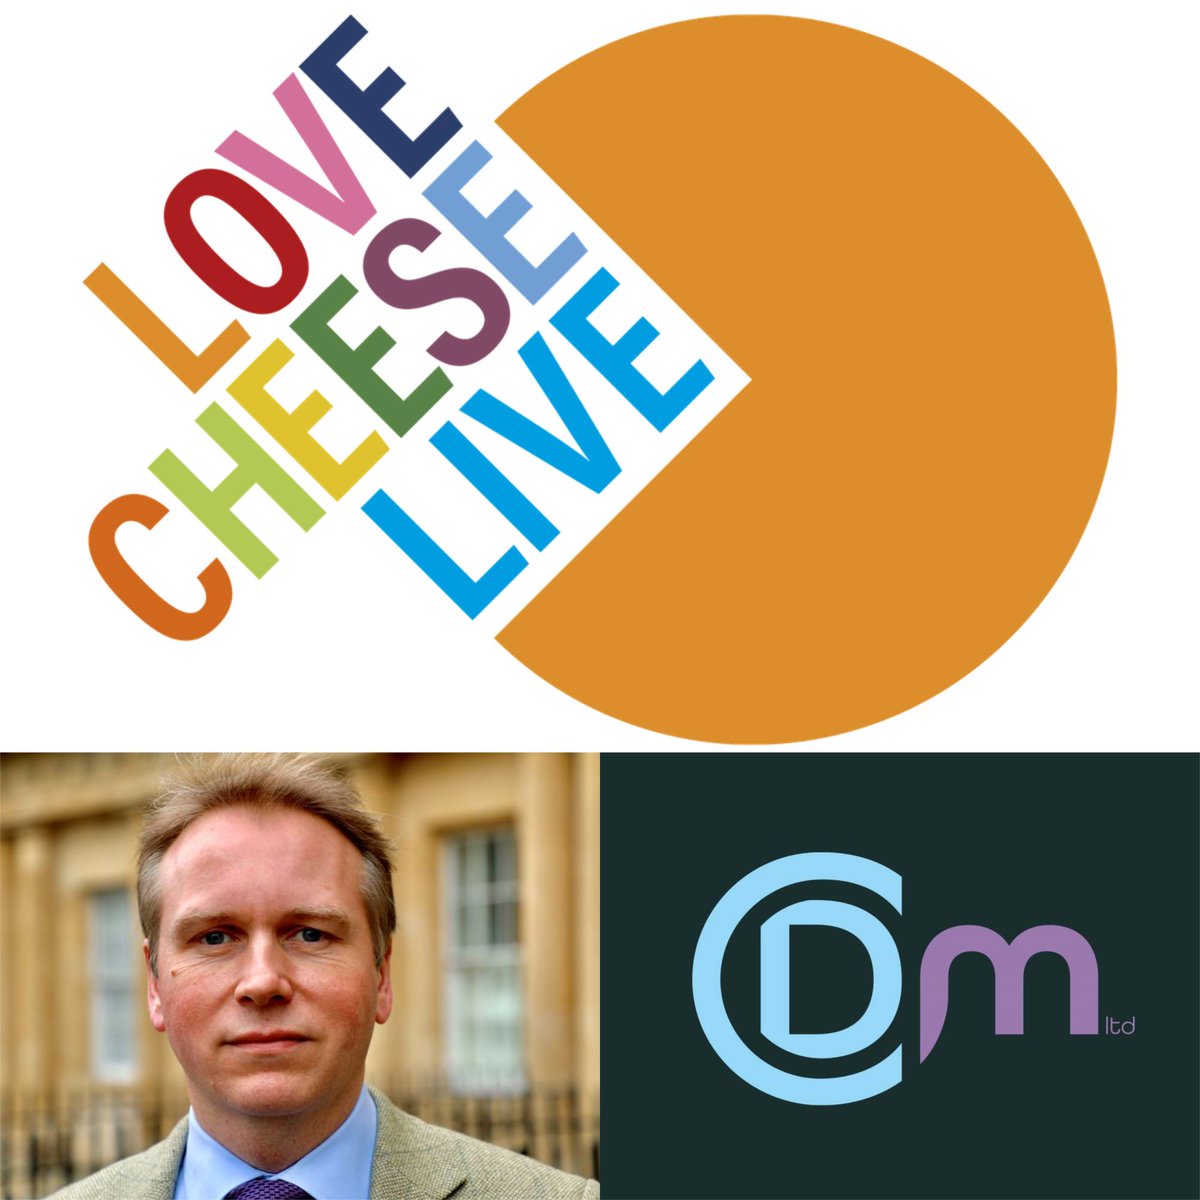 Client GRANT HARROLD (@TheRoyalButler) aka The Royal Butler - Leading UK Etiquette Expert will be appearing at Love Cheese Live today and Saturday. The event at Staffordshire County Showground is one of the UK’s largest Cheese, Food and Drink Festivals. @lovecheeselive